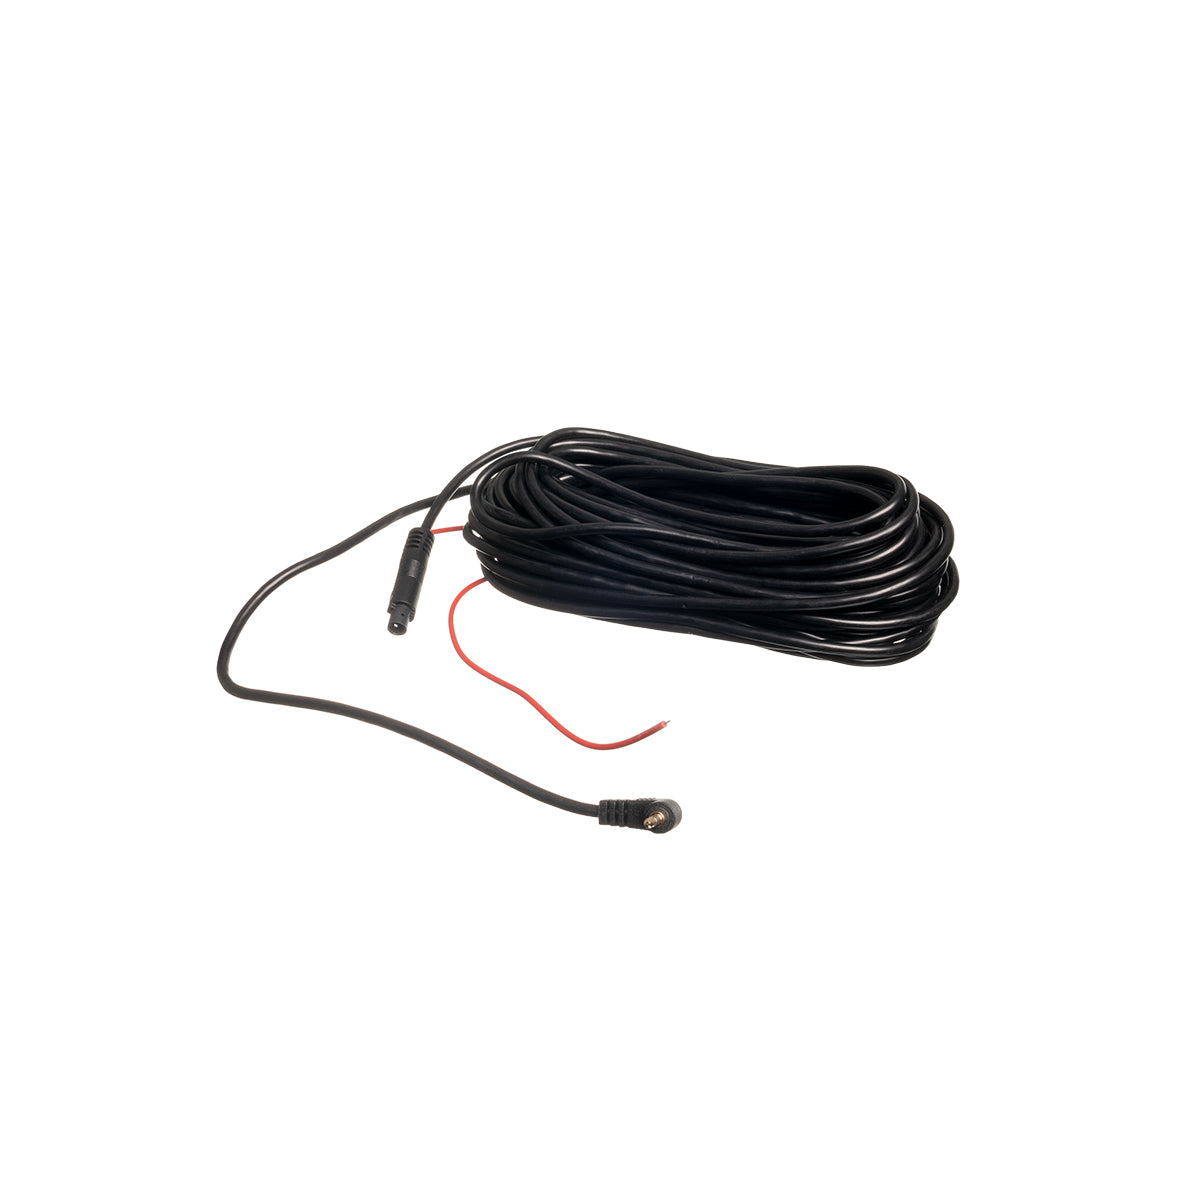 14m Extension Cable for Mirror DVR